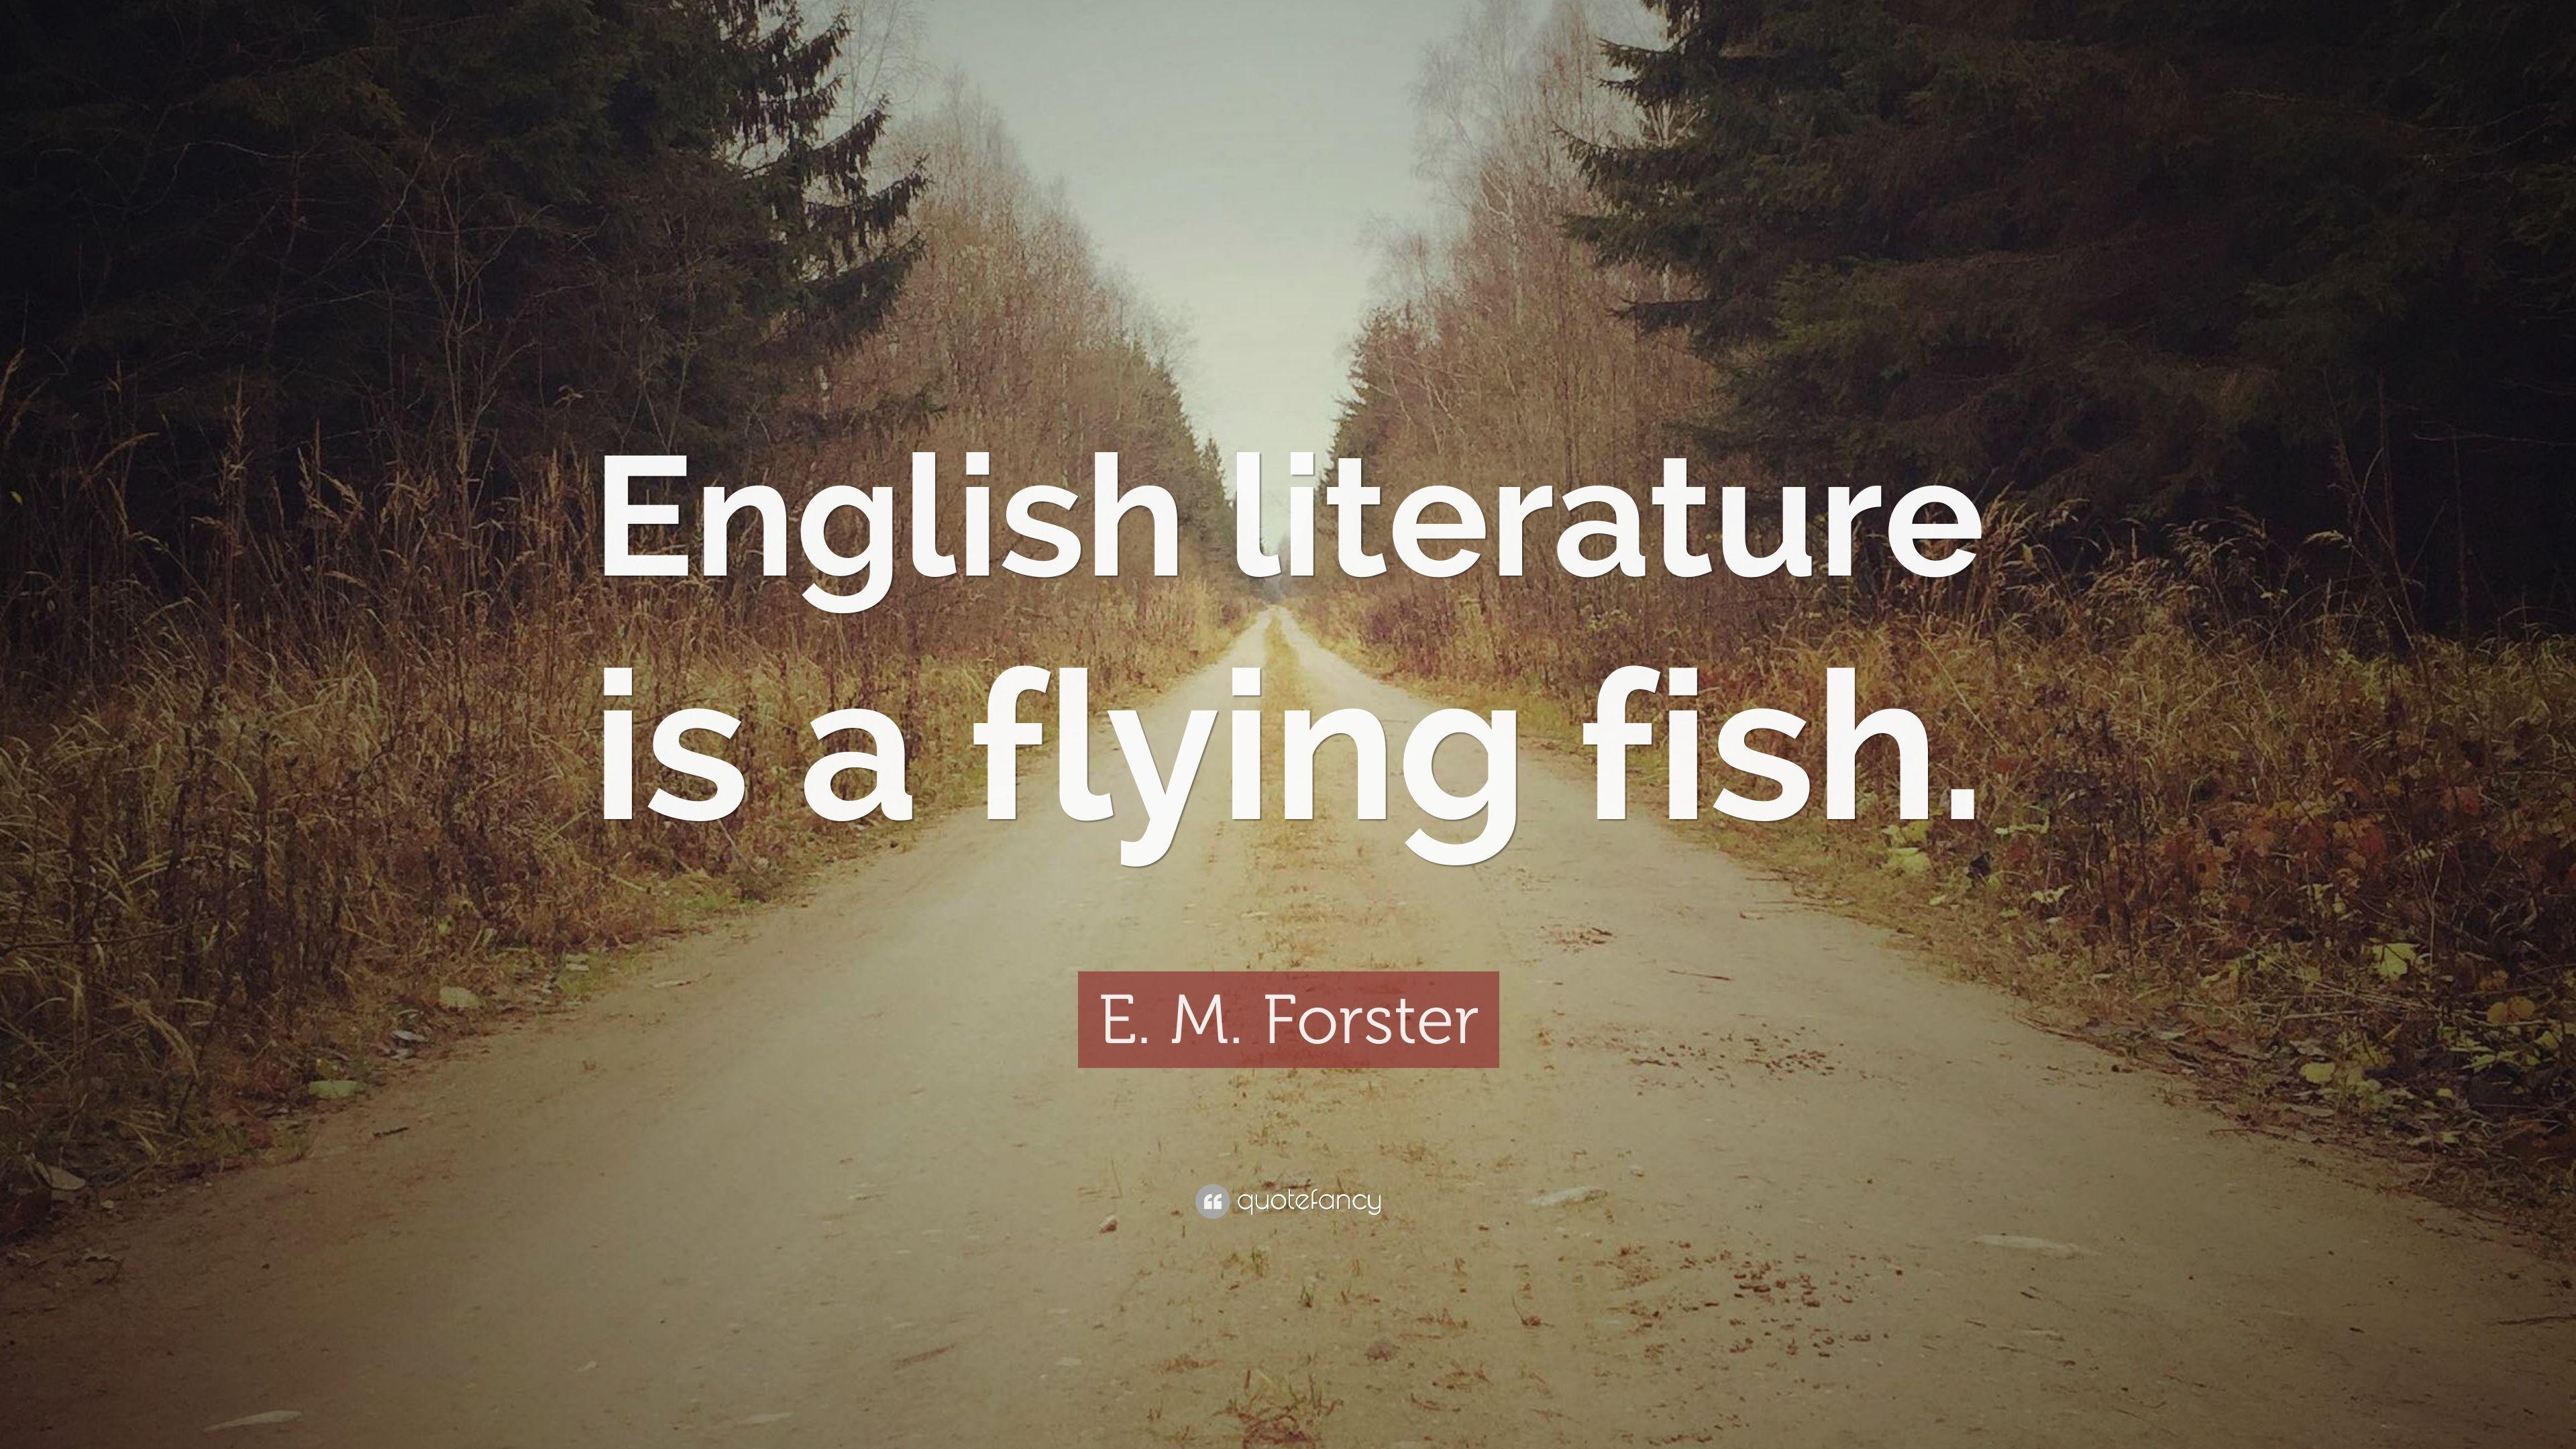 E. M. Forster Quote: “English literature is a flying fish.” 5